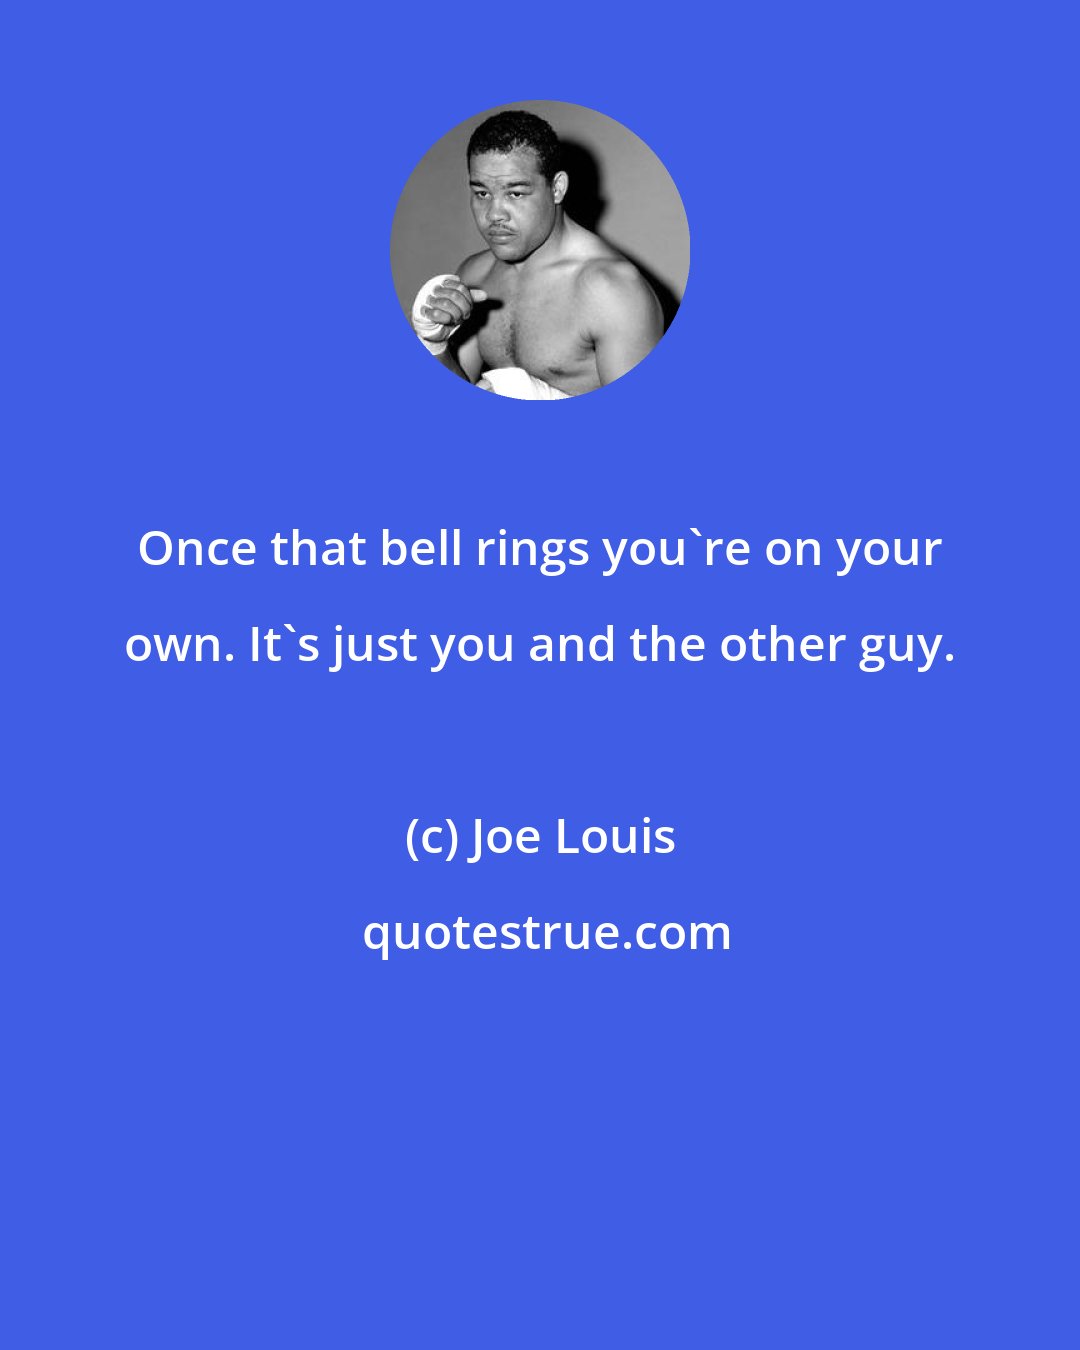 Joe Louis: Once that bell rings you're on your own. It's just you and the other guy.